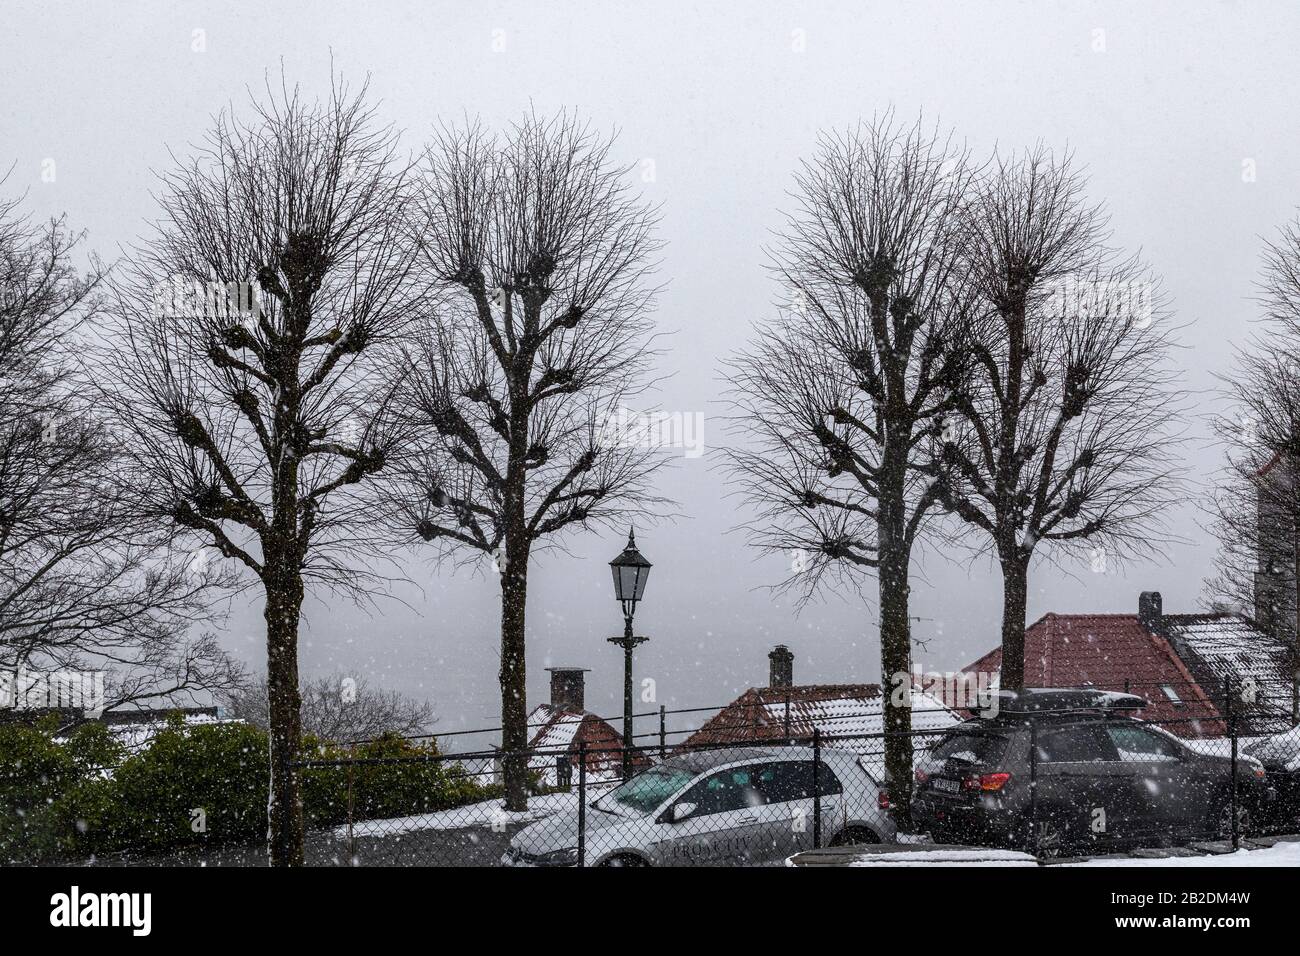 Street scene from one of the old parts of downtown Bergen, Norway. Winter at Klosterhaugen at Nordnes. View across Haugeveien through the snowstorm to Stock Photo